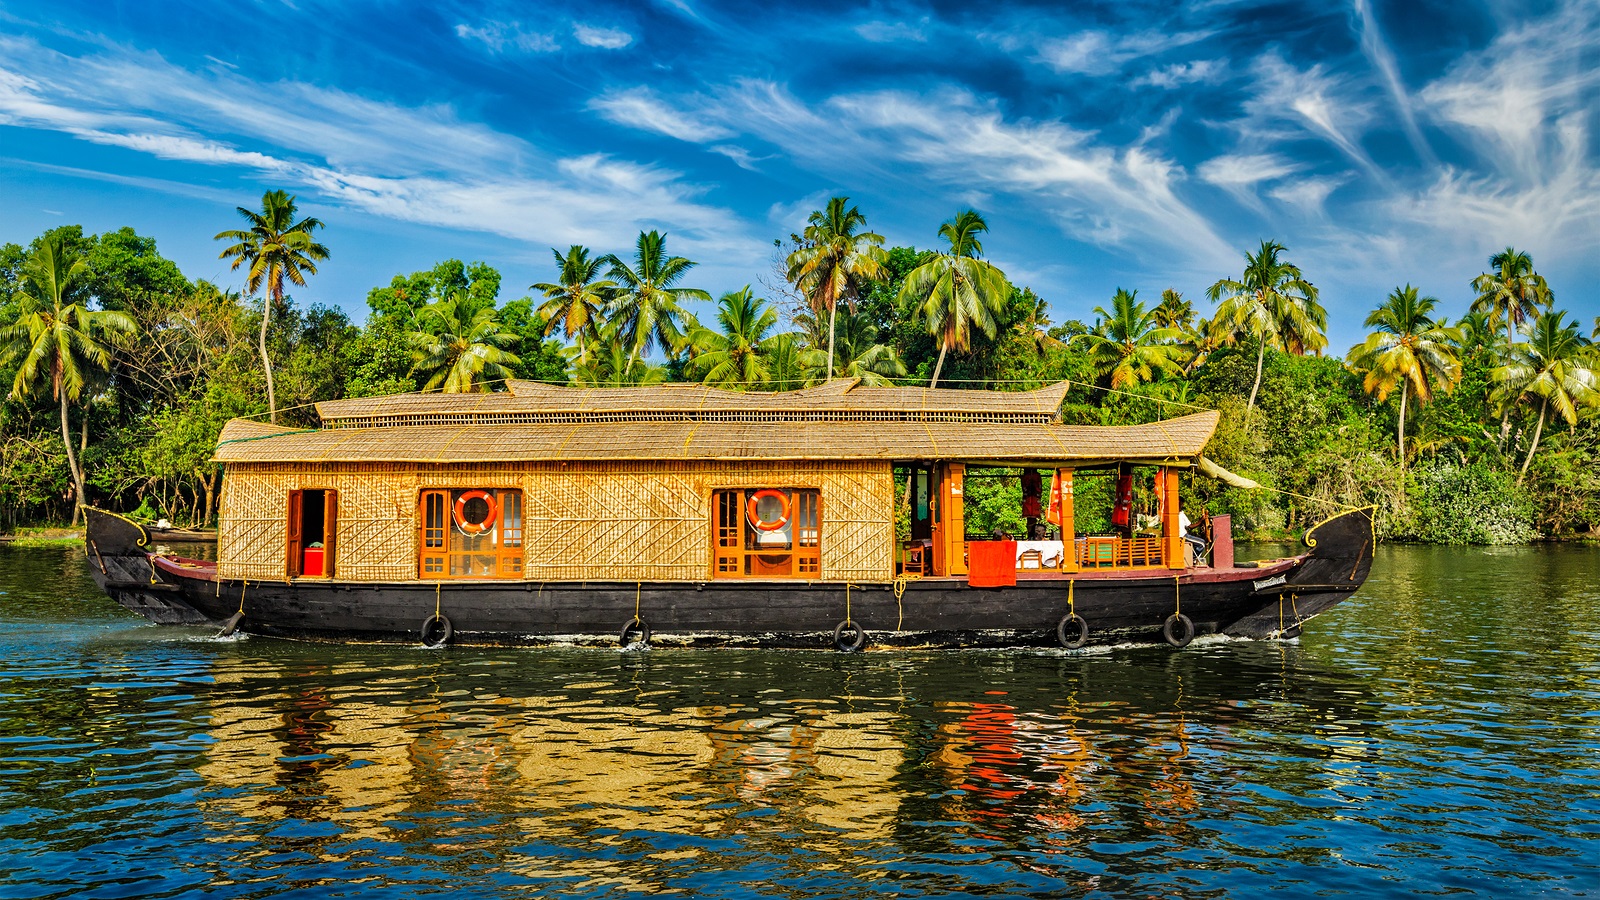 SITES & ACTIVITIES TO BE THOUGHT ABOUT WHILE YOU ARE IN KERALA - Kesari